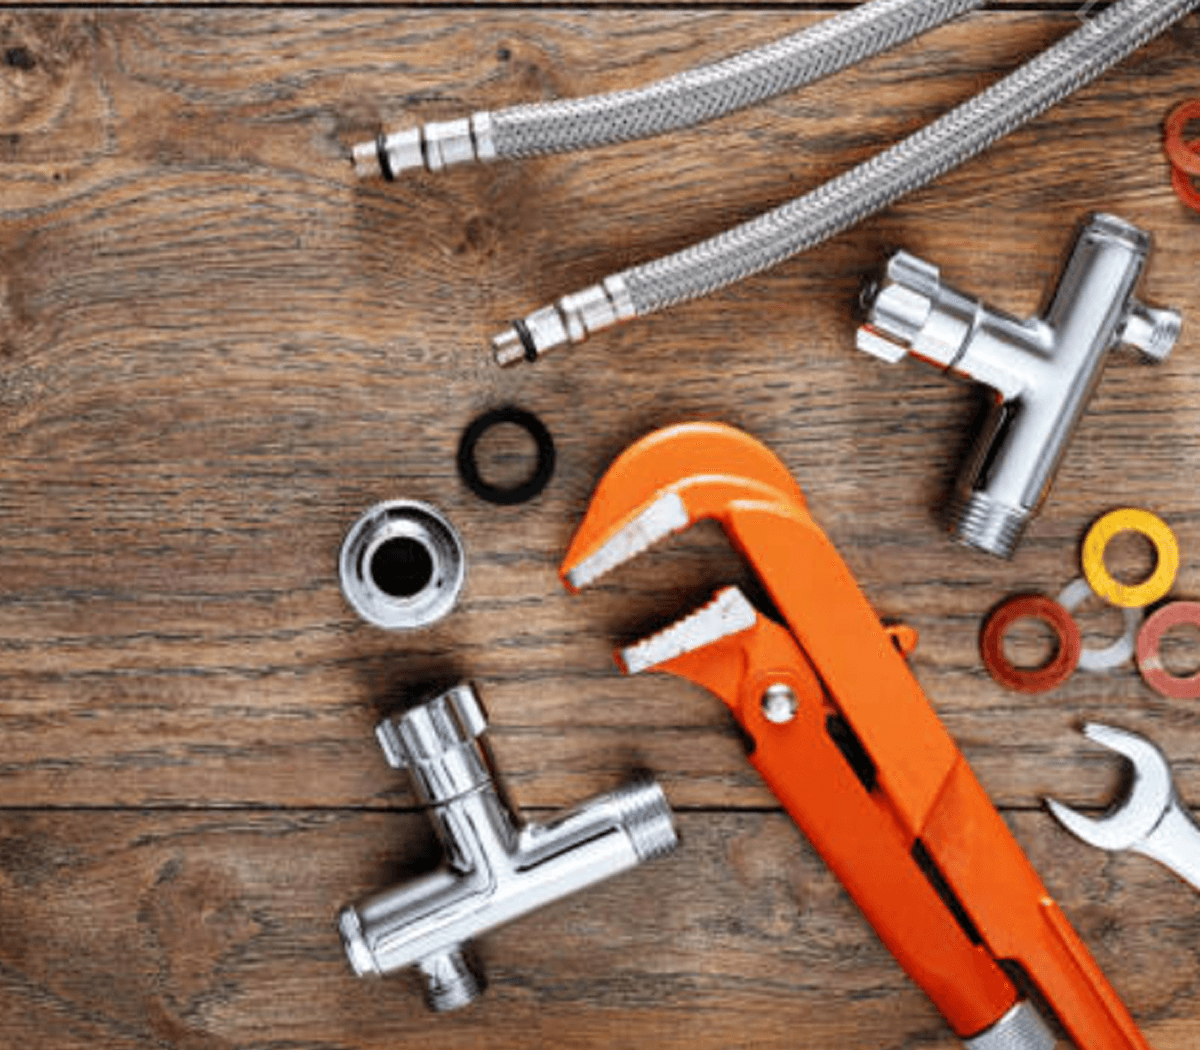 Want more leads for your plumbing business? Here's what the best plumbing websites do for lead generation.